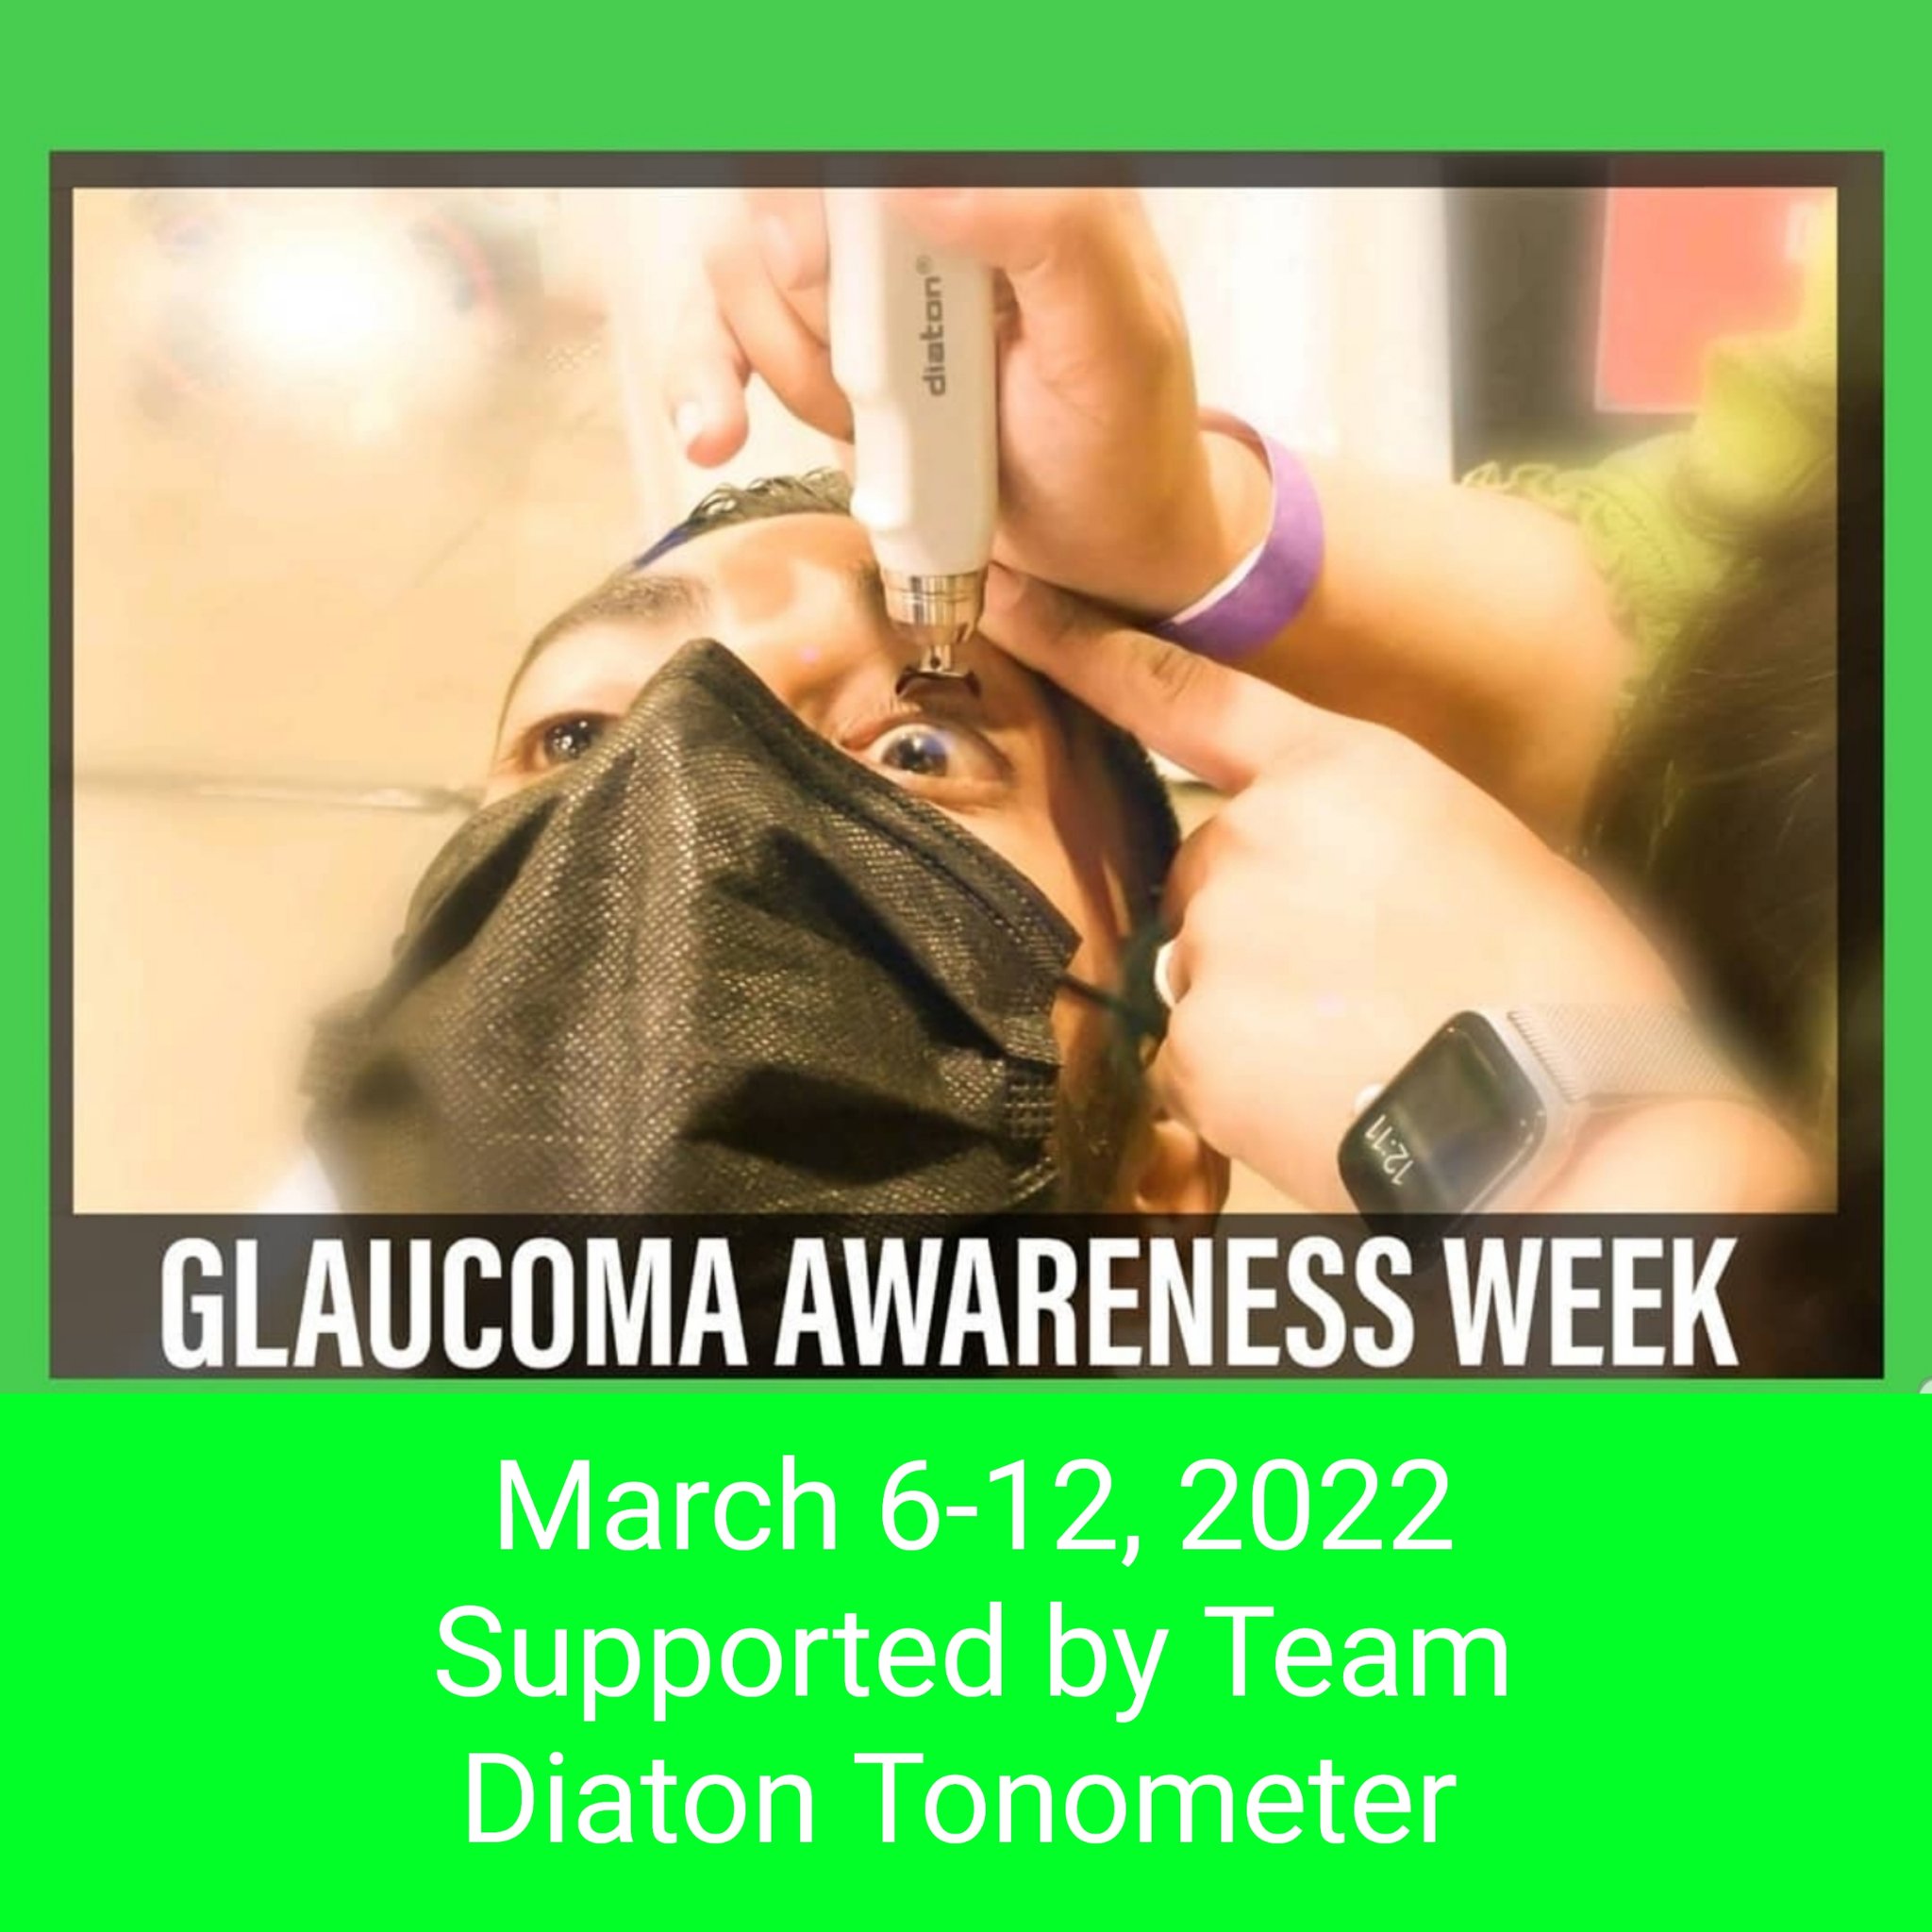 Glaucoma Awareness Week Supported by Diaton Tonometer